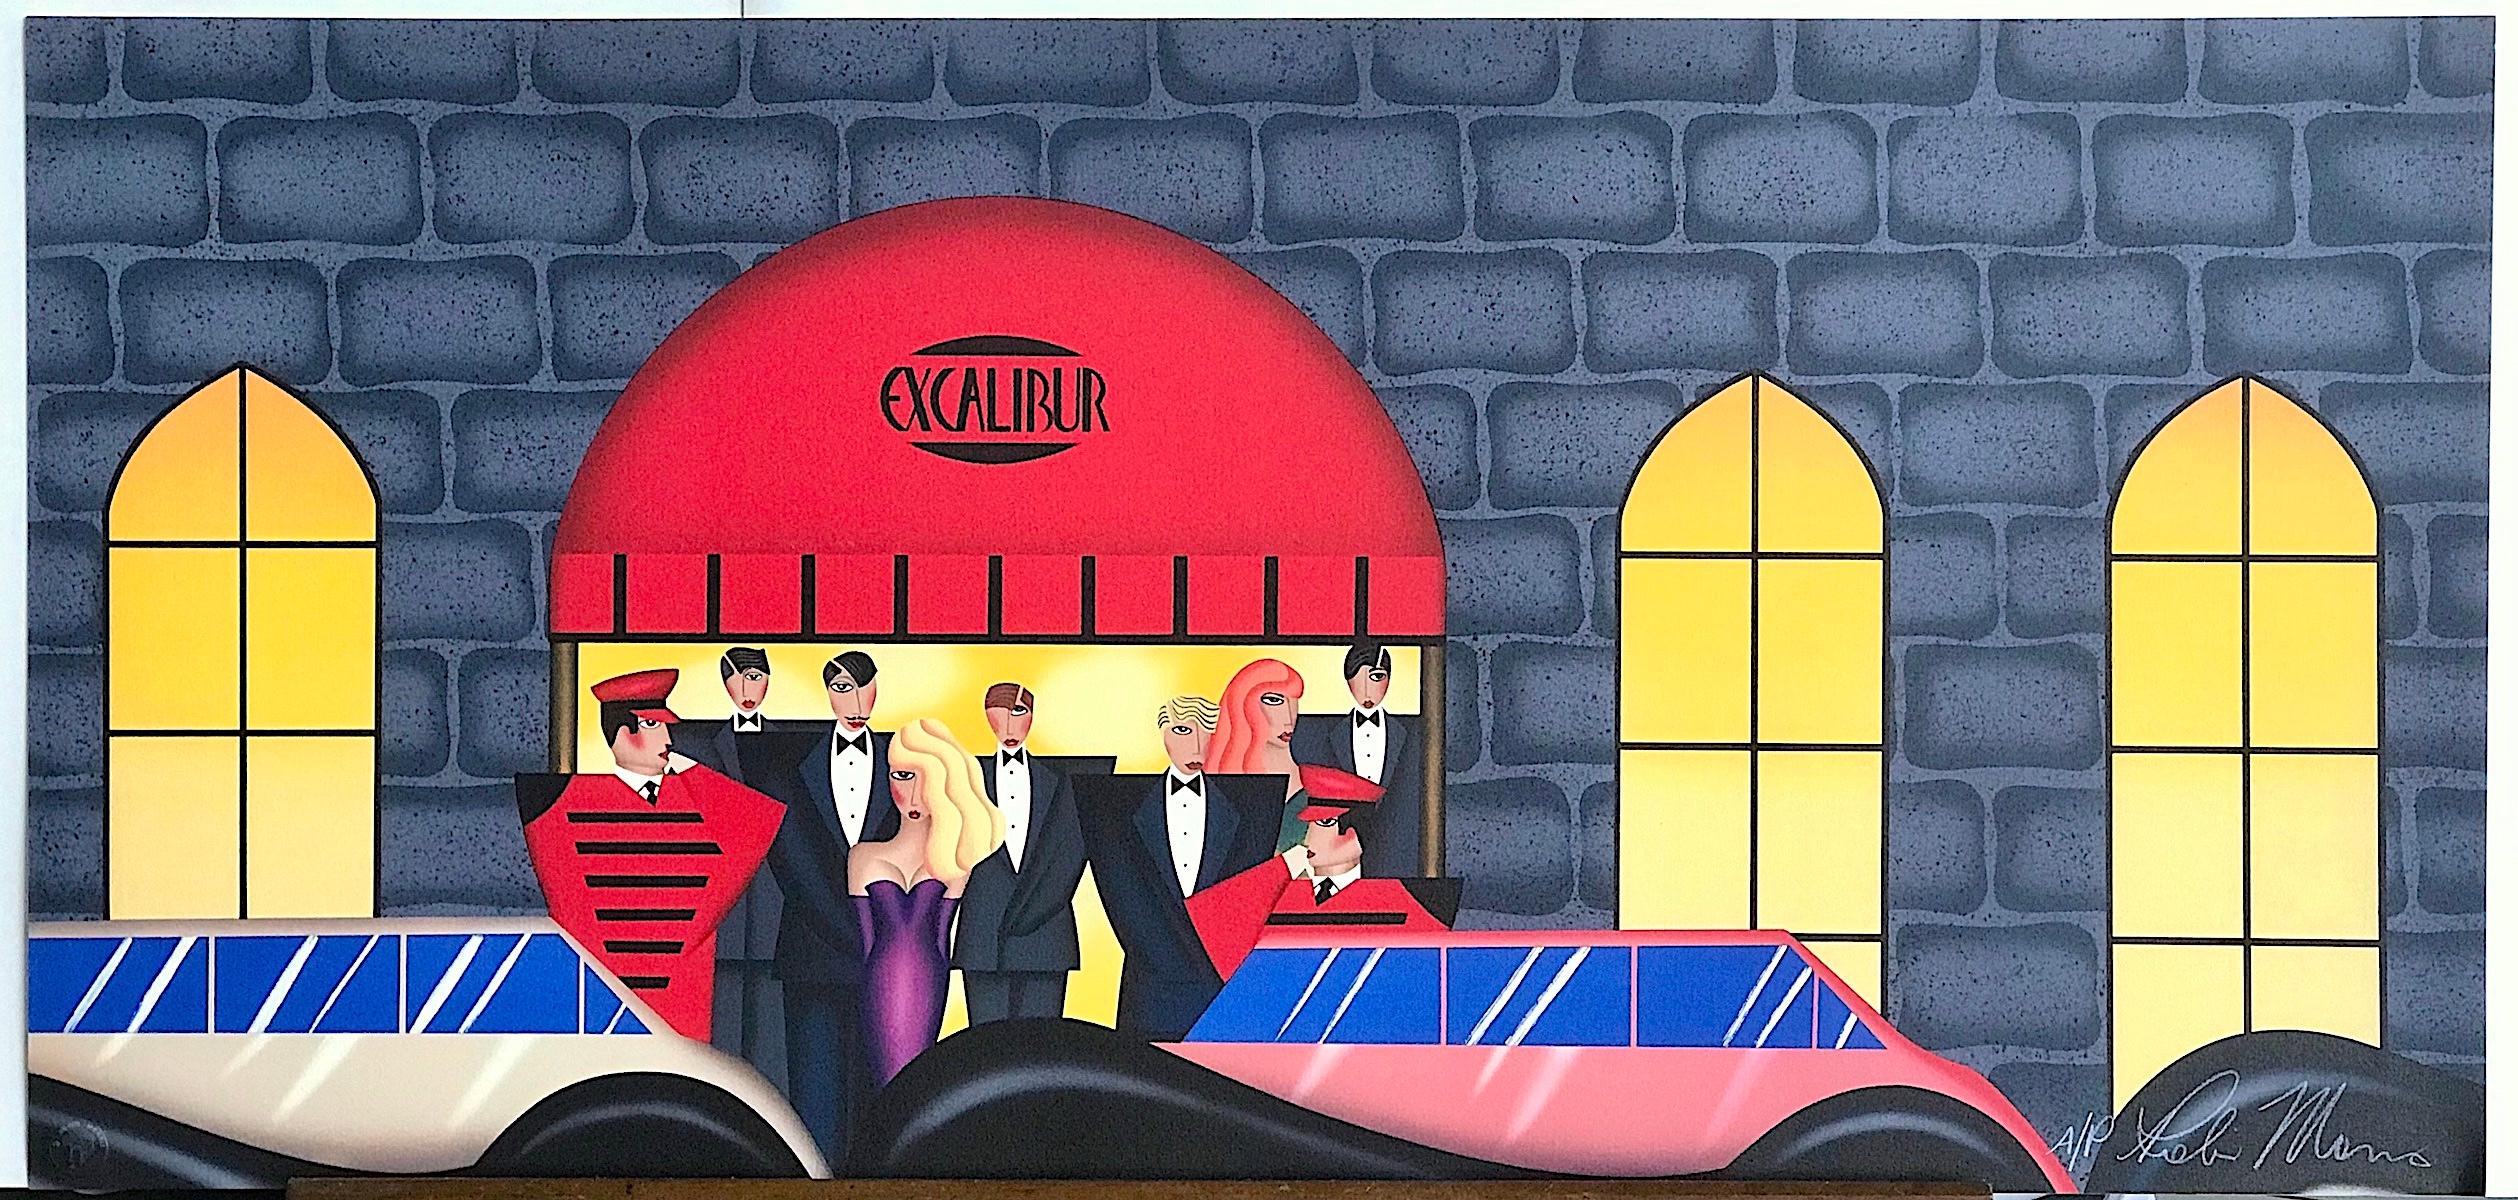 EXCALIBUR Signed Lithograph, Night Club Scene, Luxury Classic Cars - Print by Robin Morris